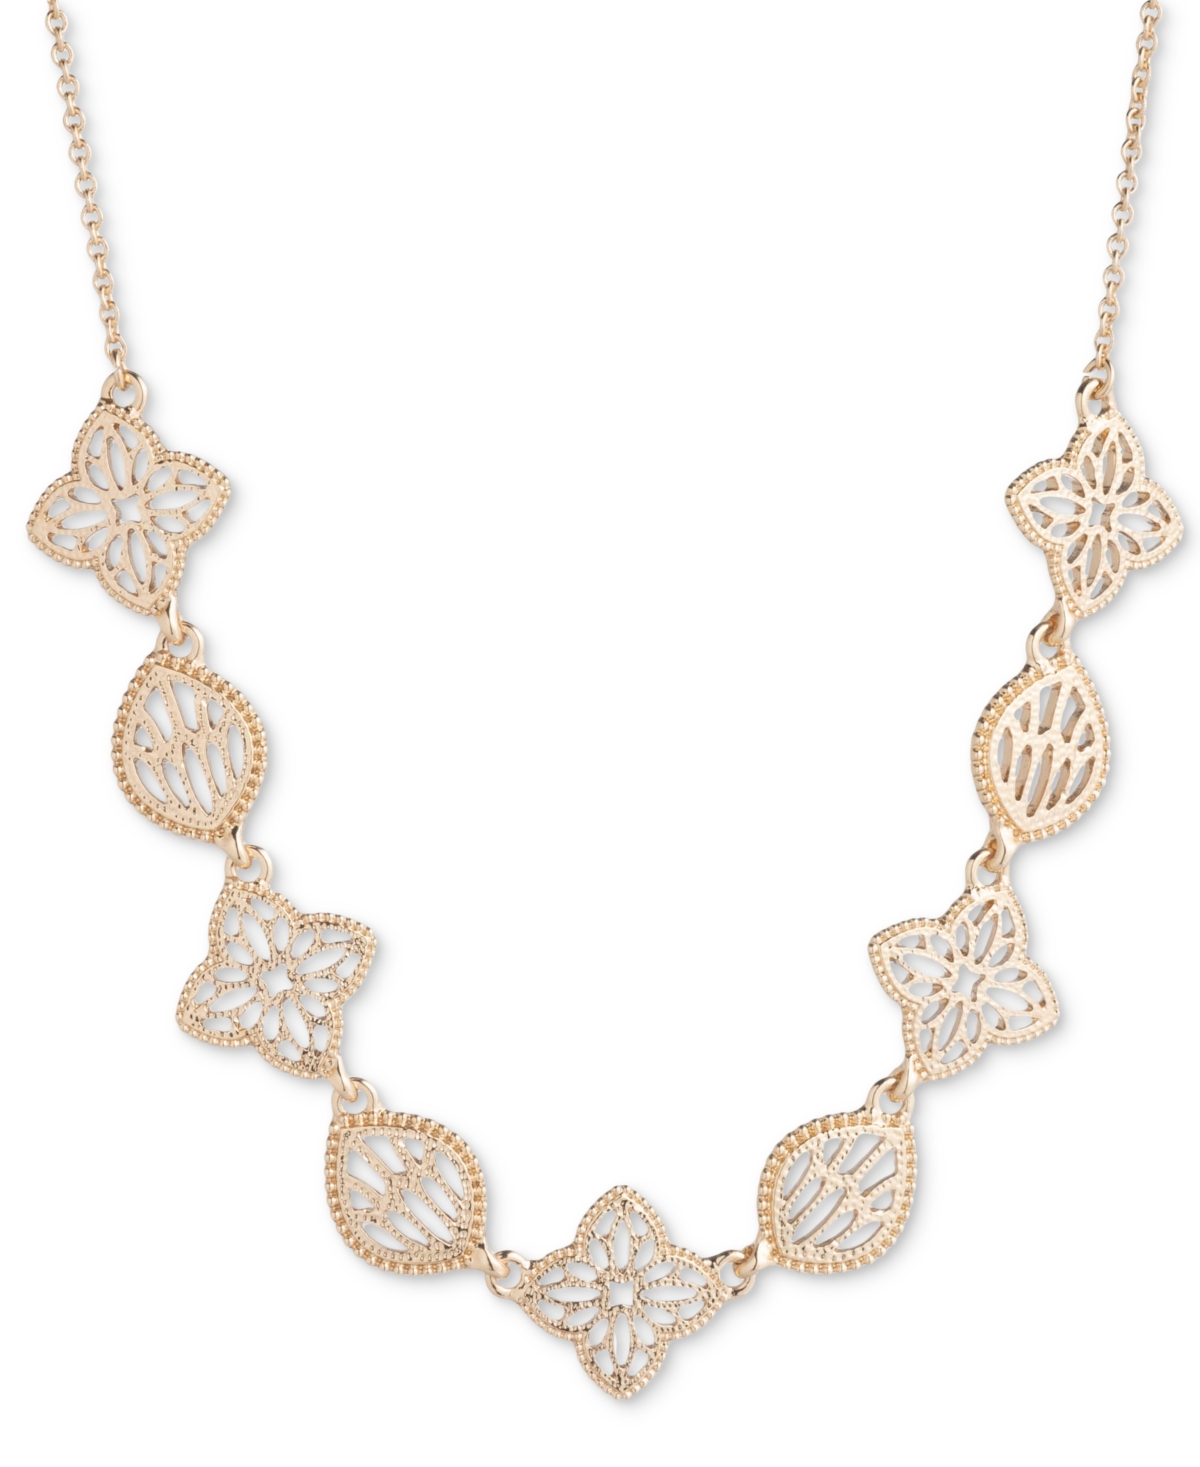 Shop Marchesa Gold-tone Filigree Frontal Necklace, 16" + 3" Extender